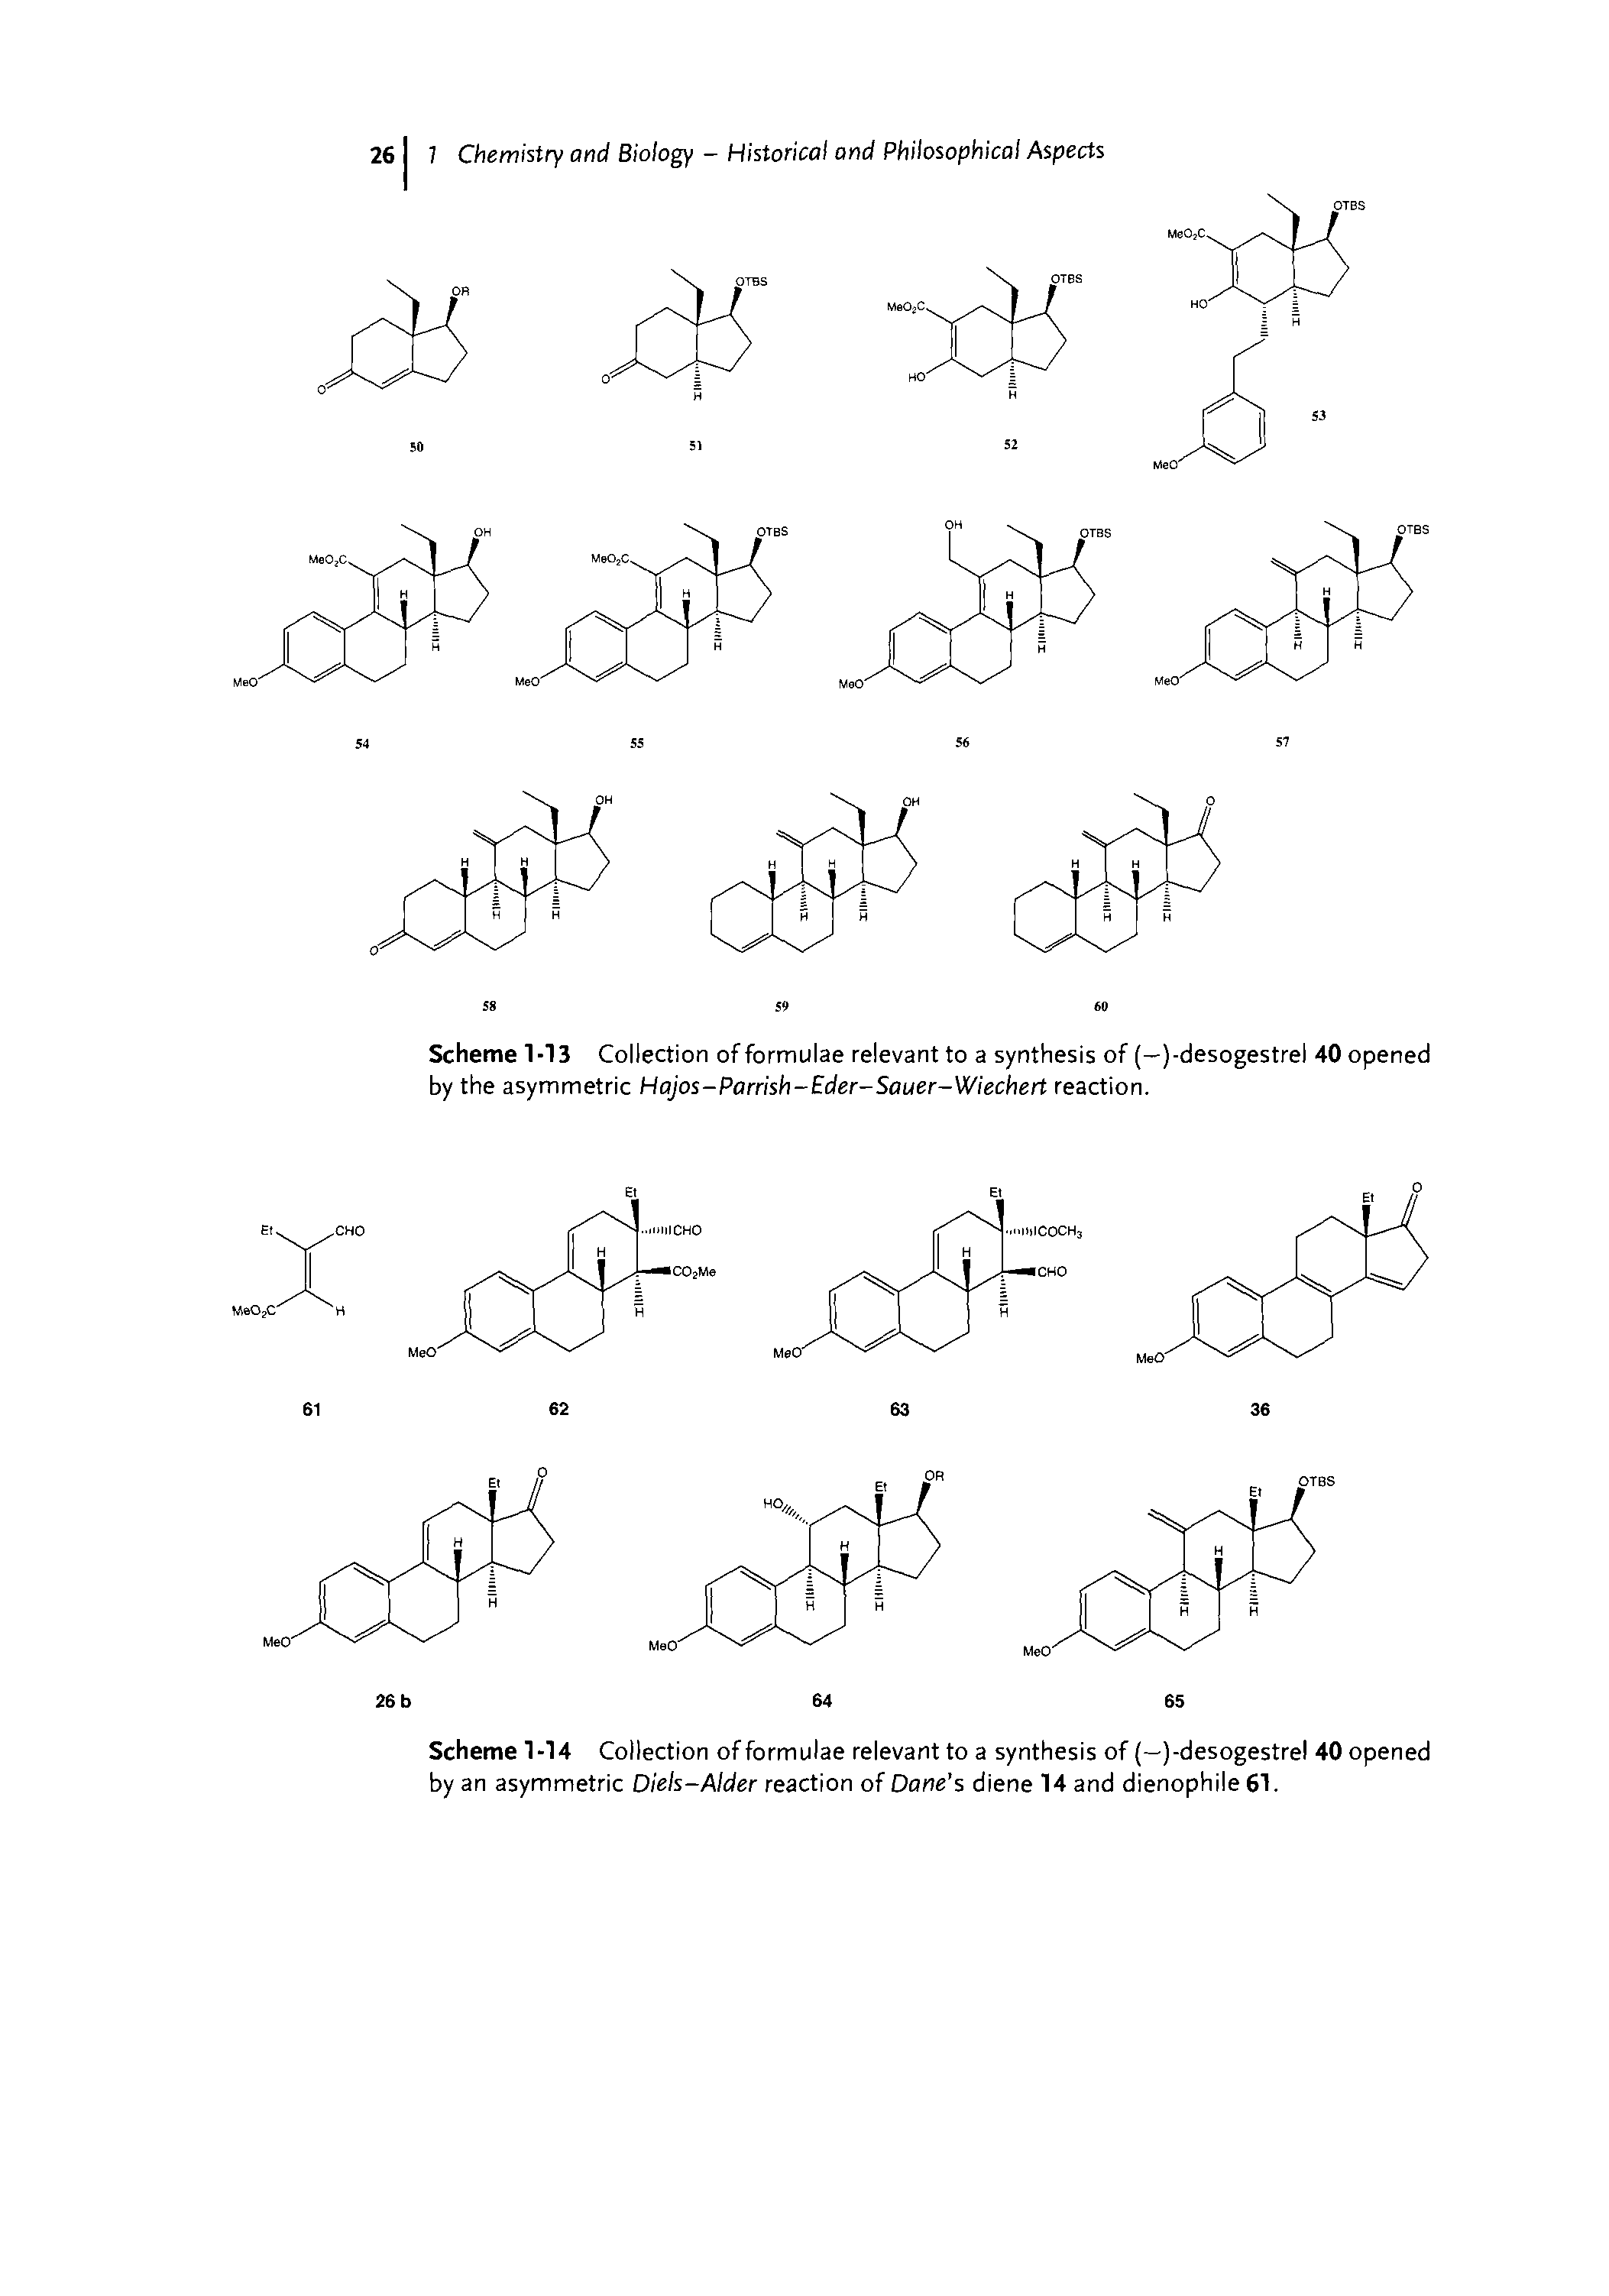 Scheme 1-13 Collection of formulae relevant to a synthesis of (—)-desogestrel 40 opened by the asymmetric Hajos-Parrish-Eder-Sauer-Wiechert reaction.